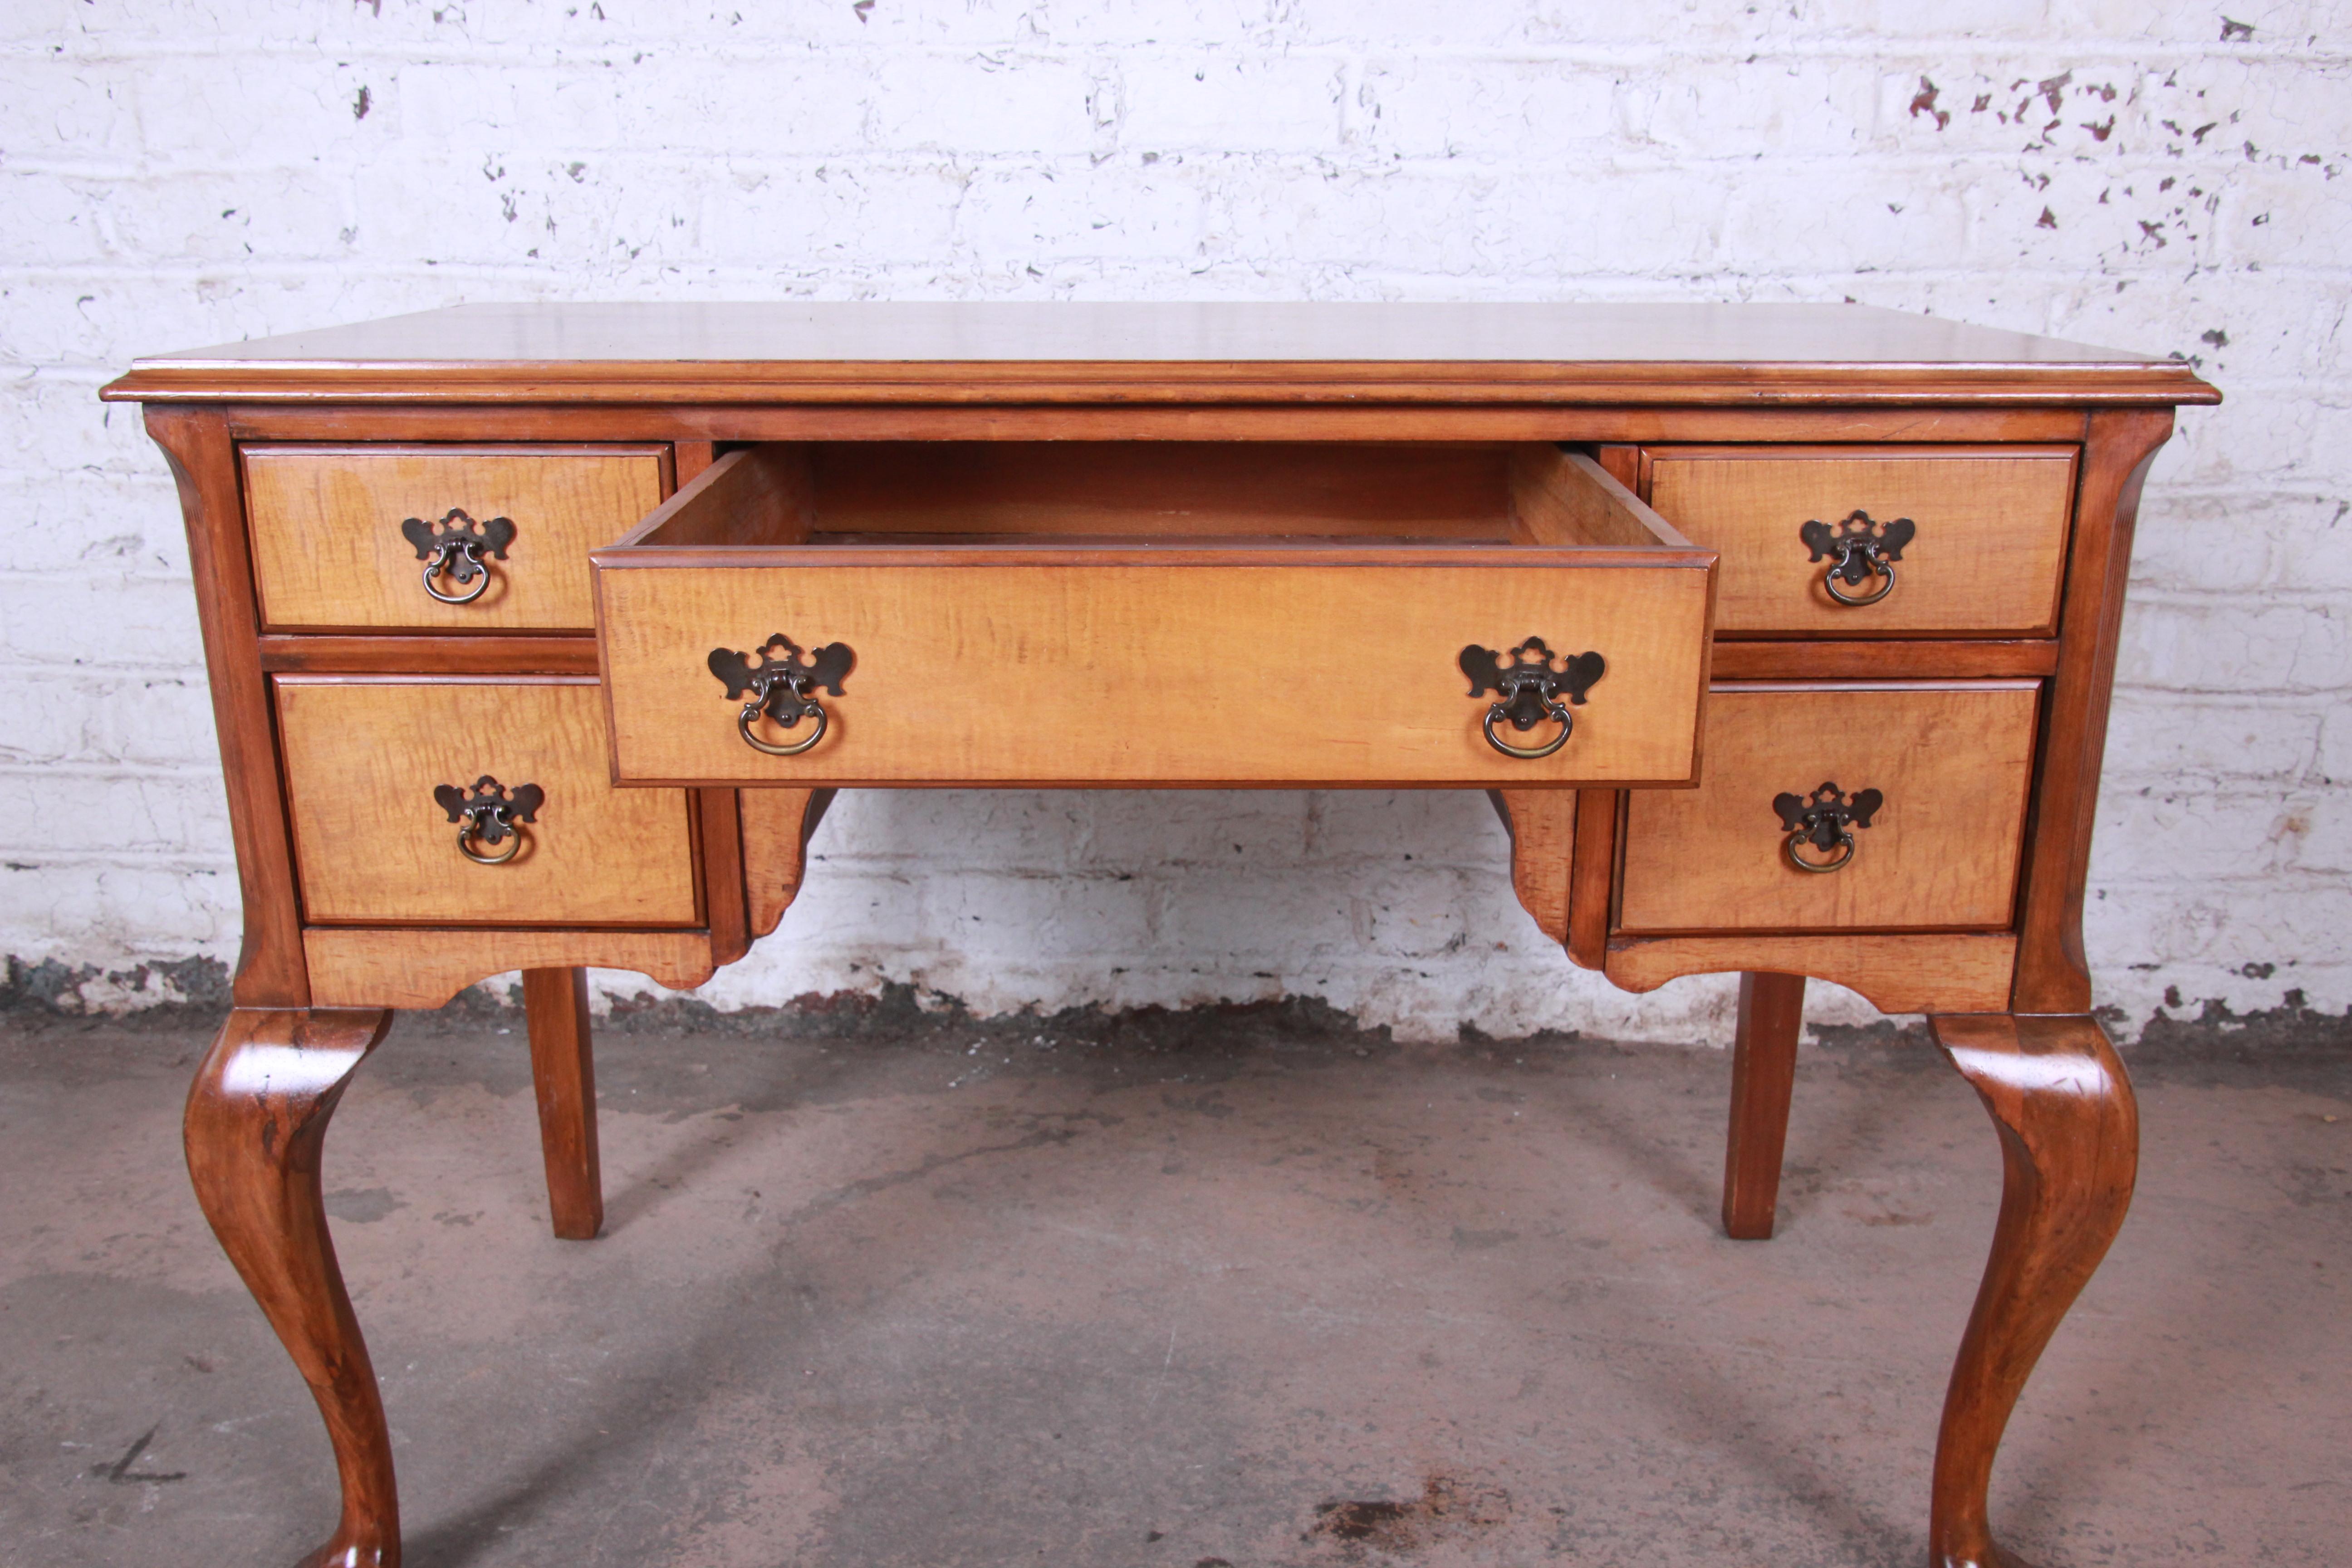 American Antique Queen Anne Style Tiger Maple Writing Desk by J.B. Van Sciver Co.